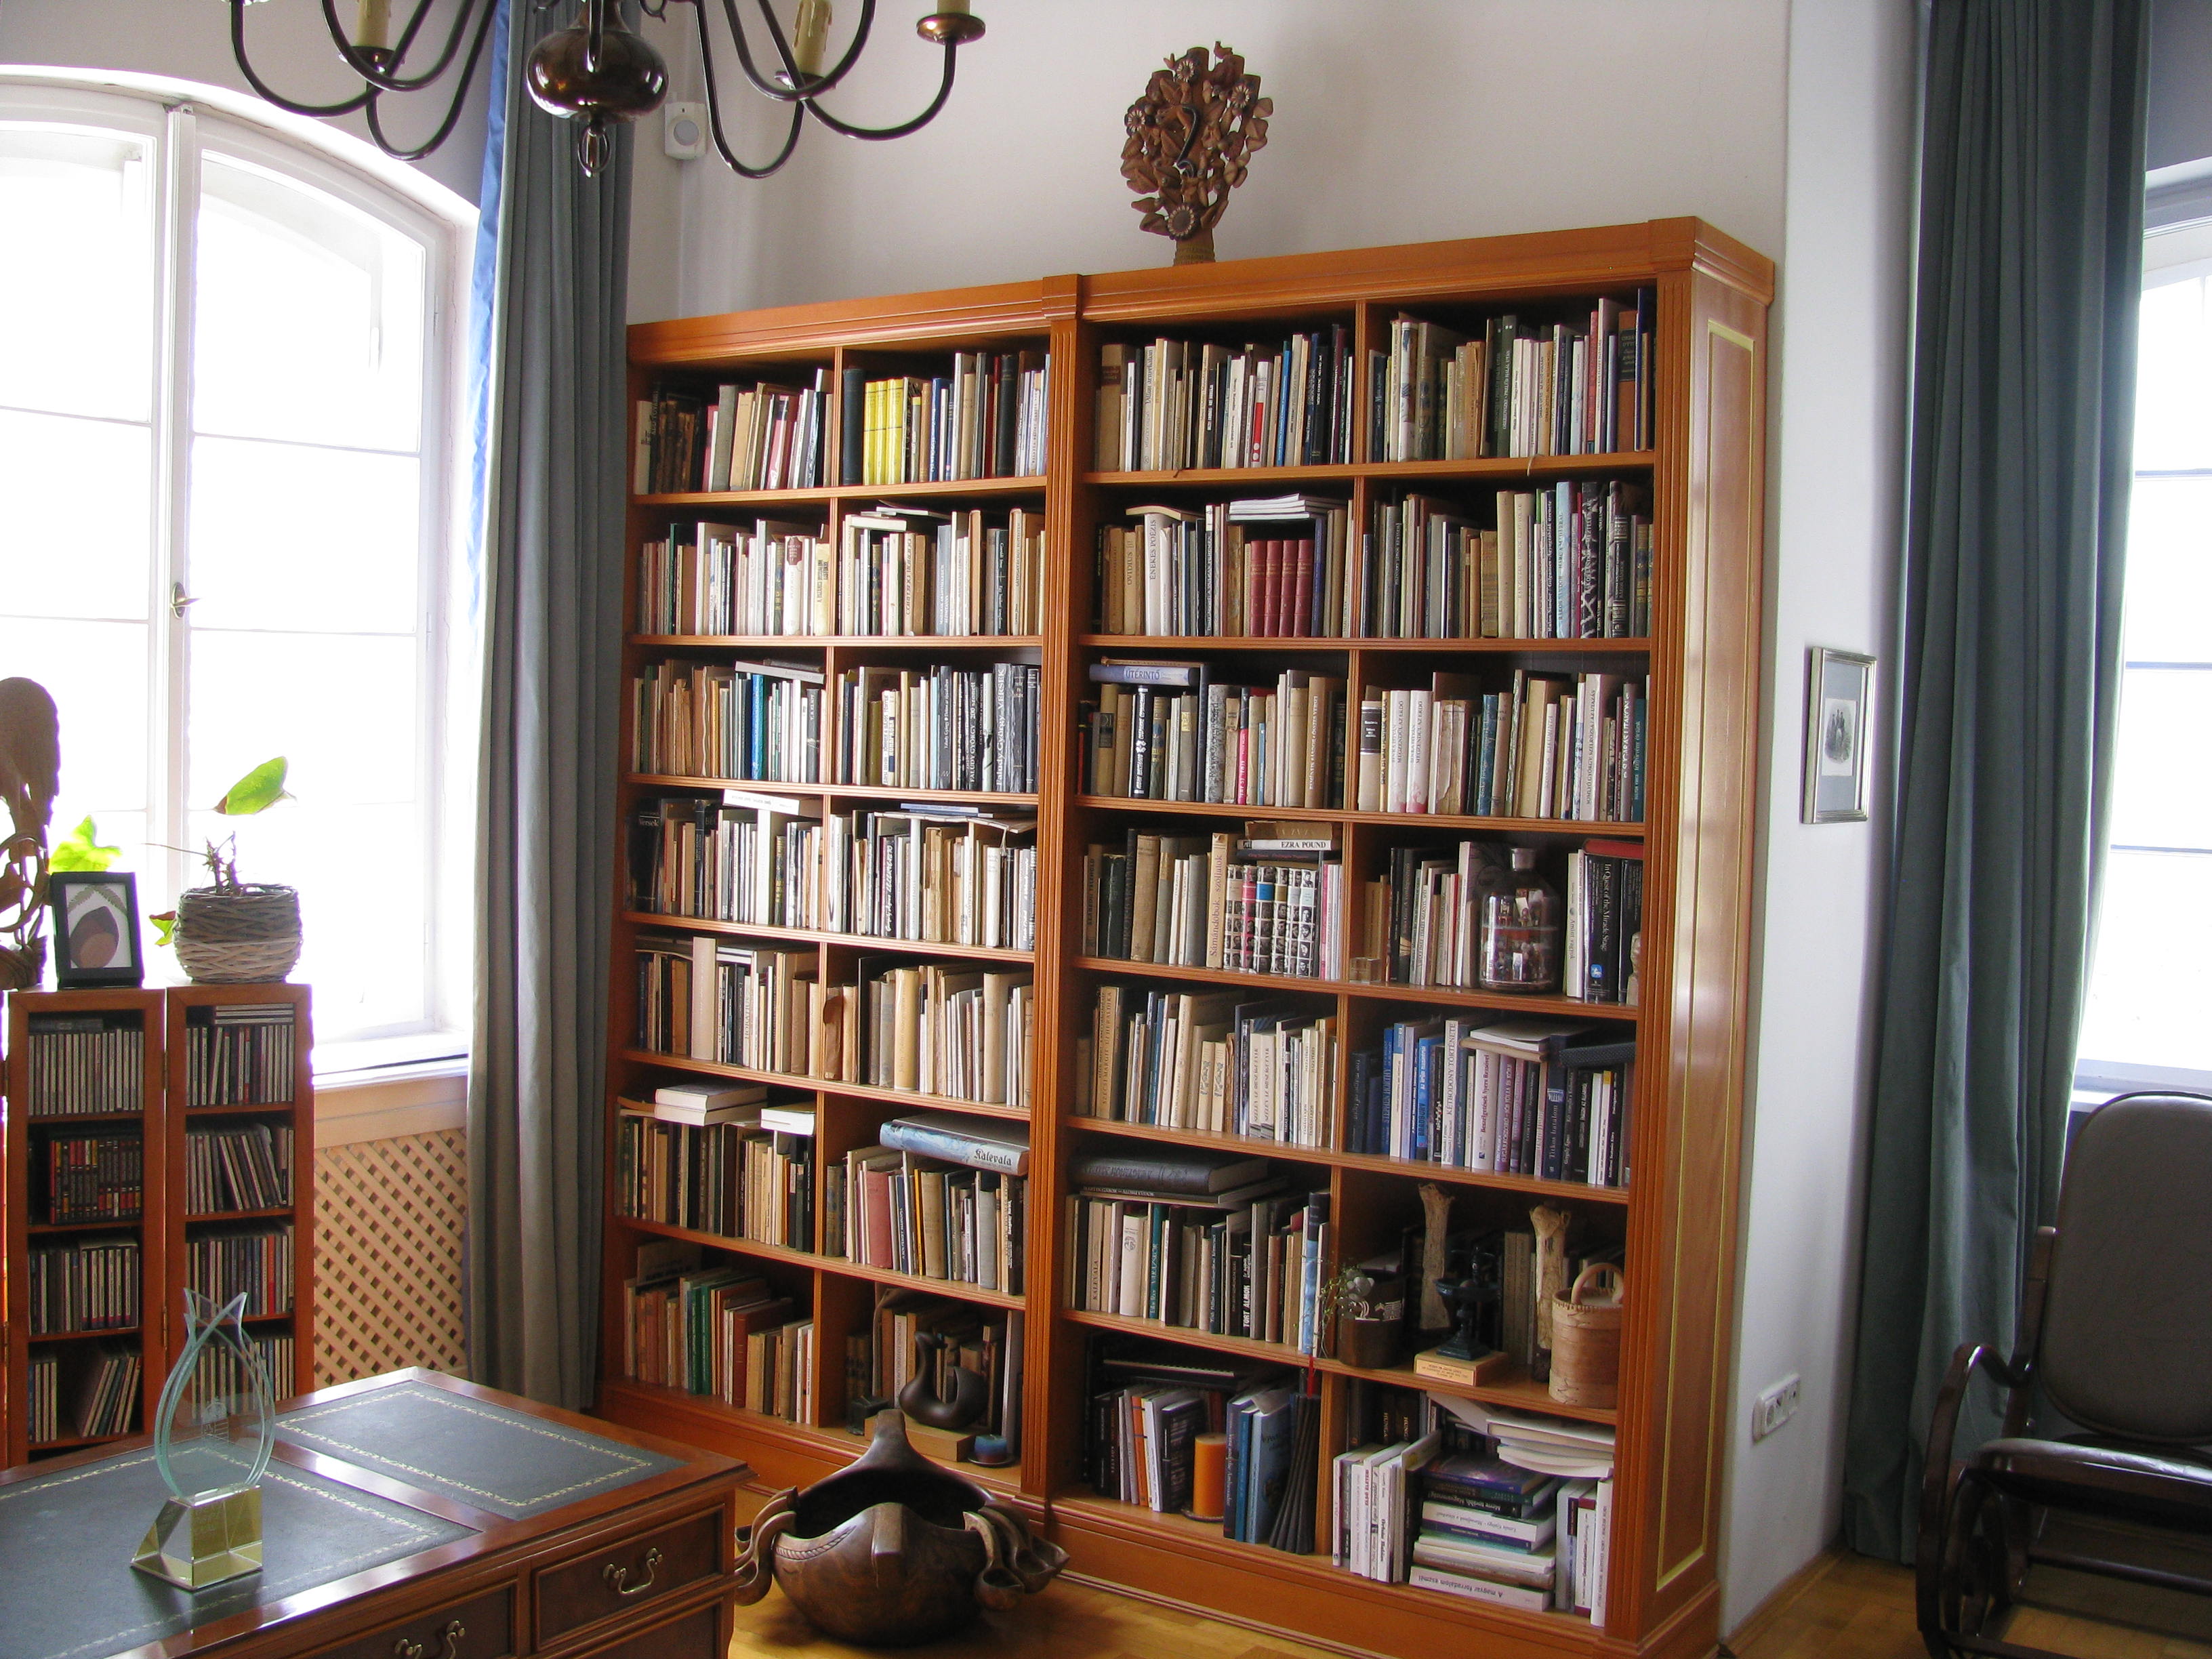 Part of the late President Árpád Göncz's home library at his residence of Vérhalom square, Budapest, 2018. 